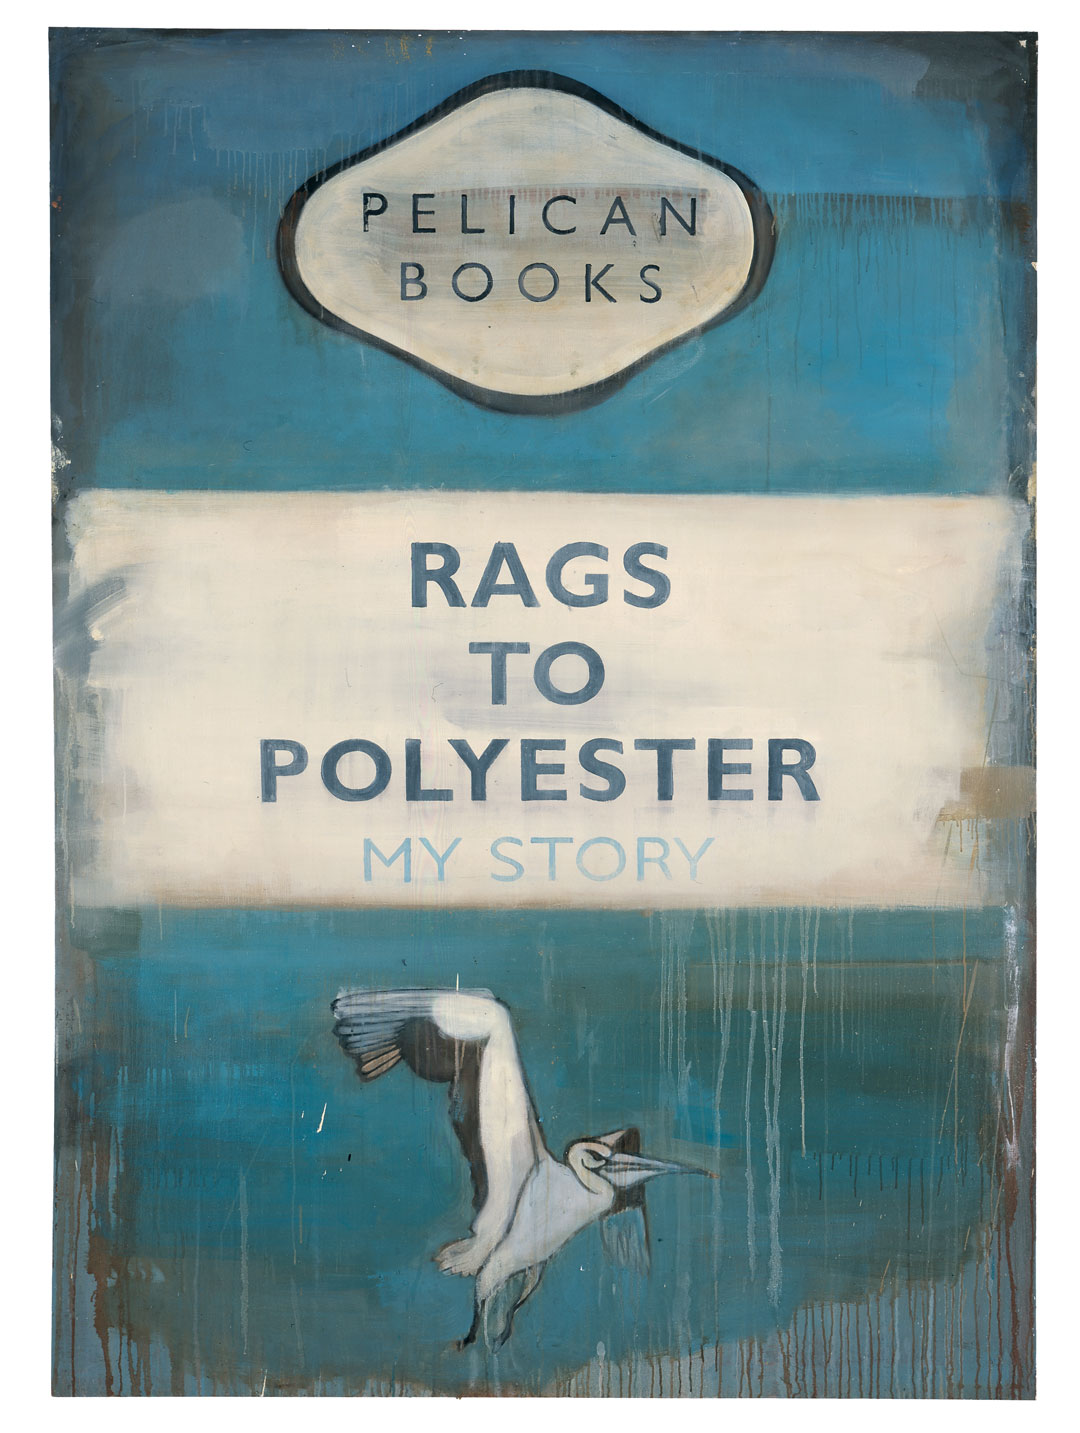 Rags to Polyester – My Story (2002) by Harland Miller